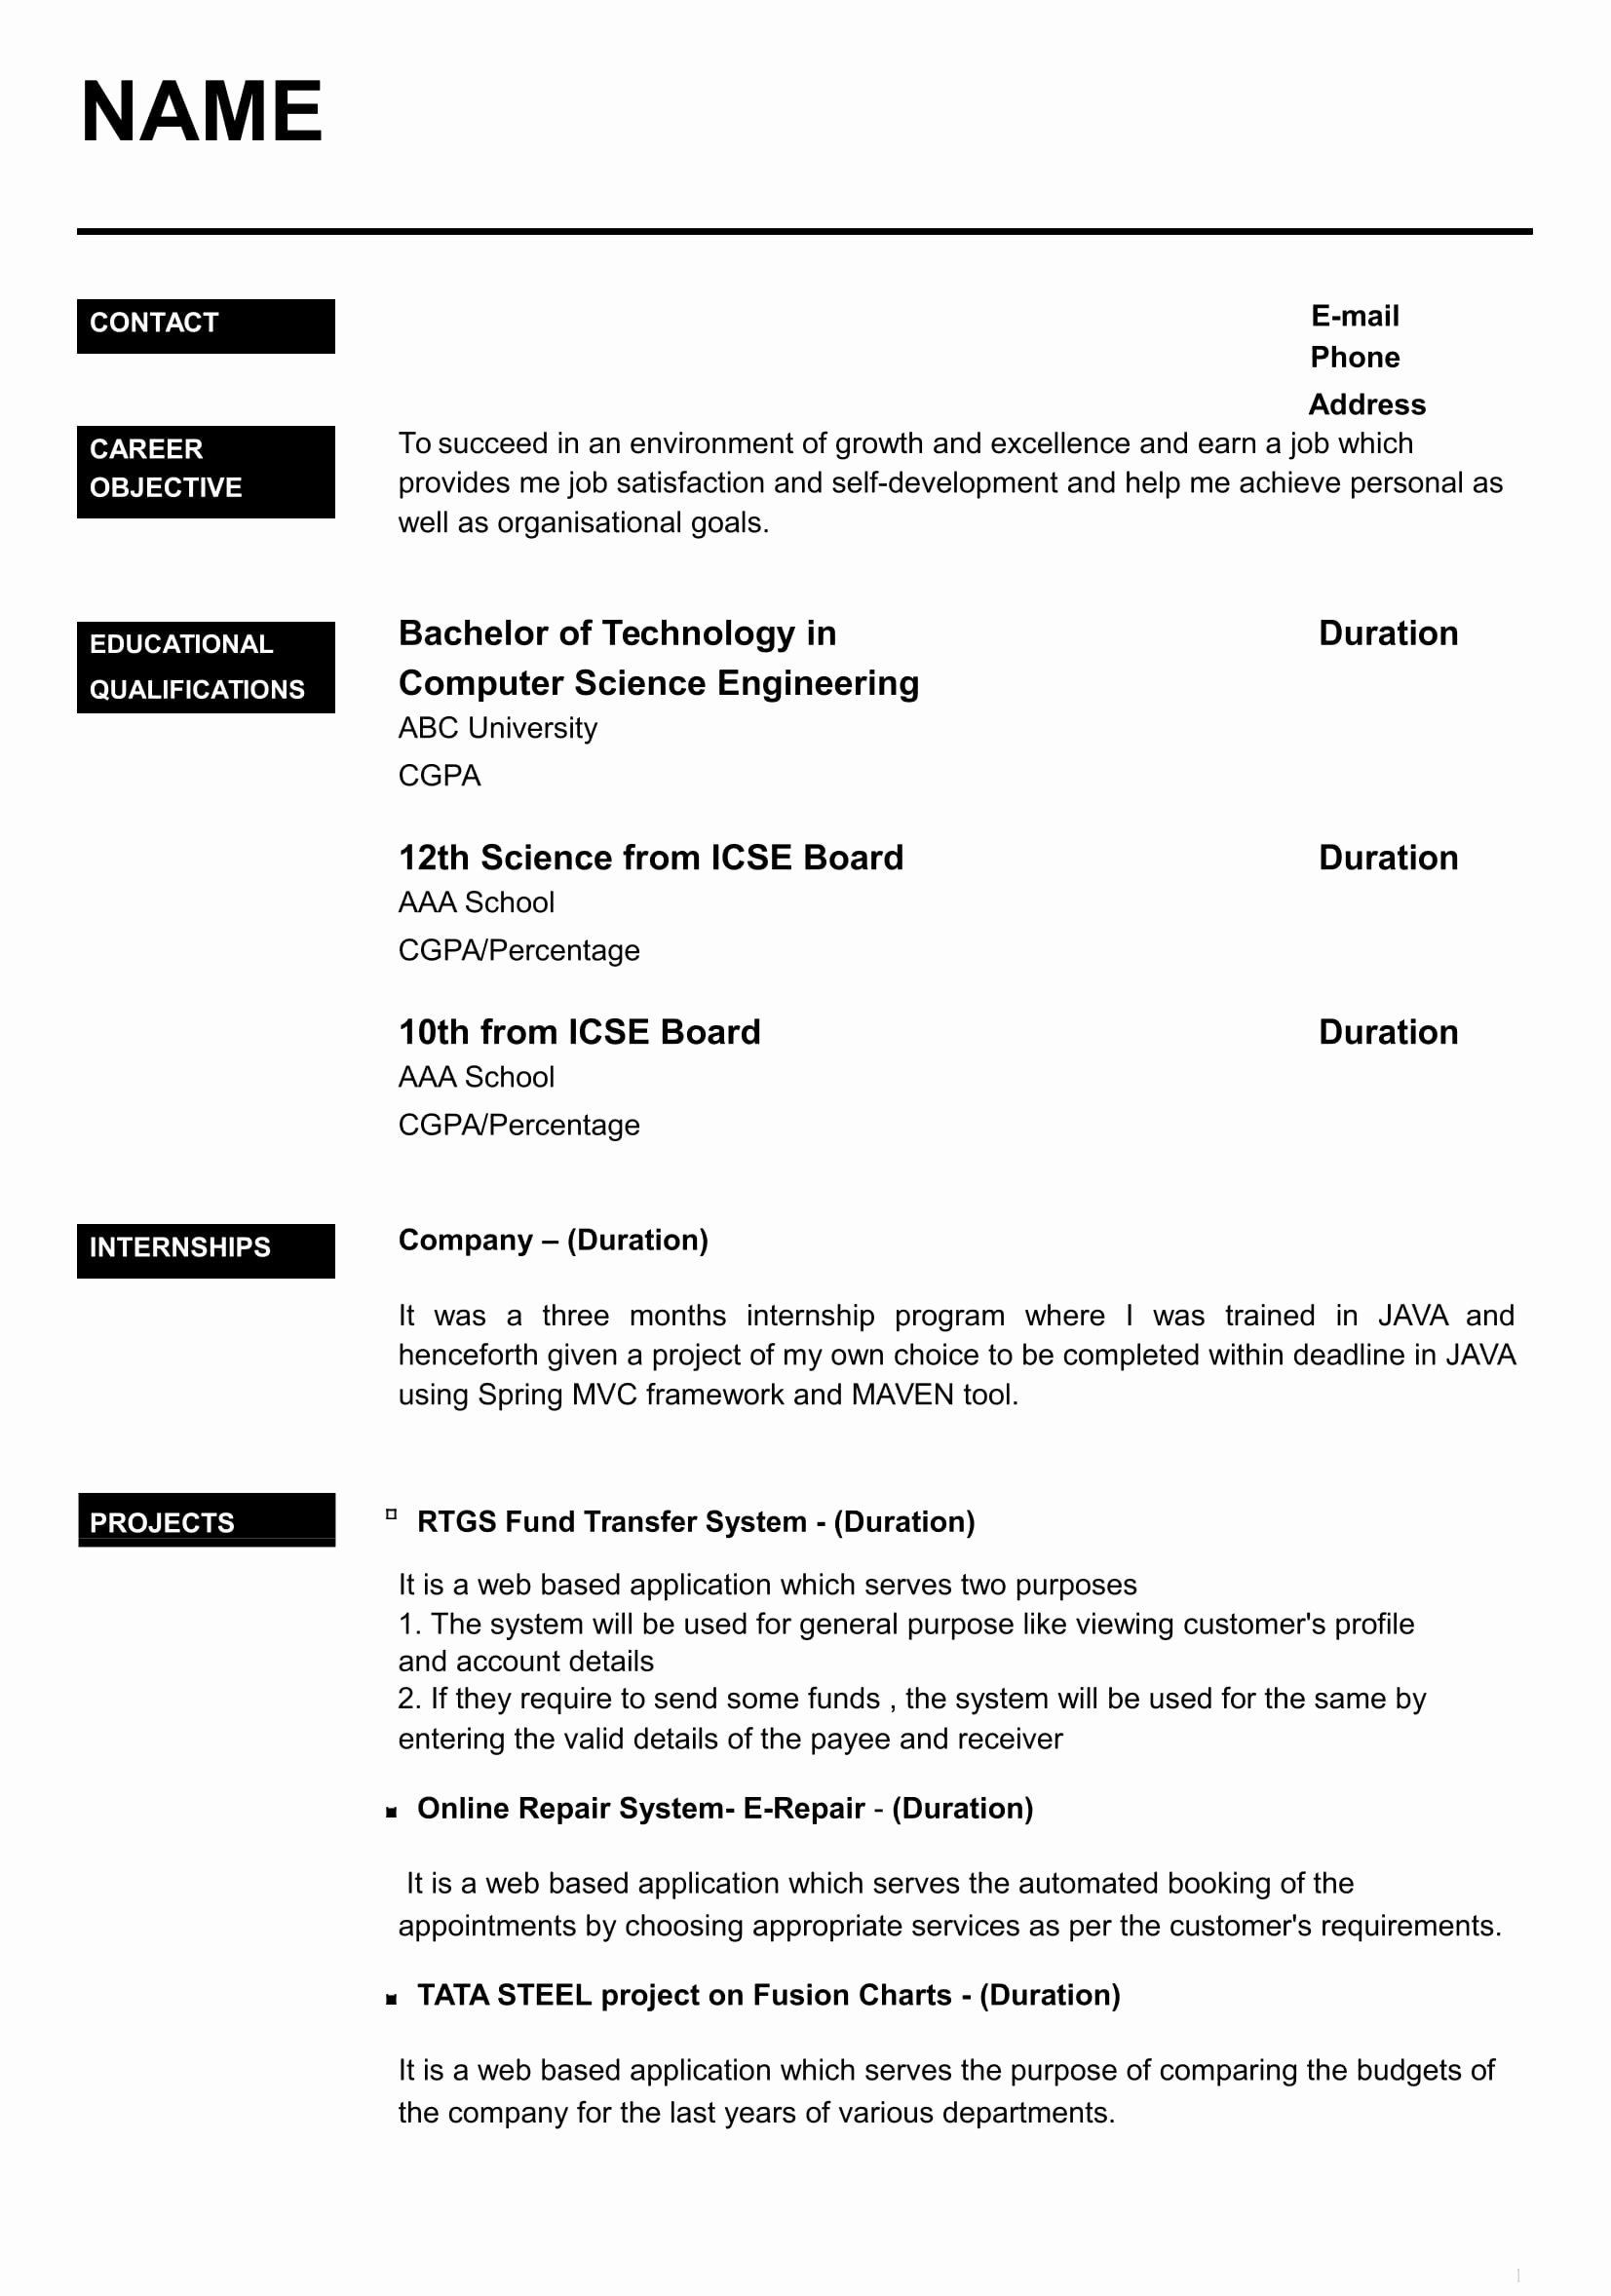 Best Resume Templates for Freshers Download Resume with Picture Template New 32 Resume Templates for Freshers …